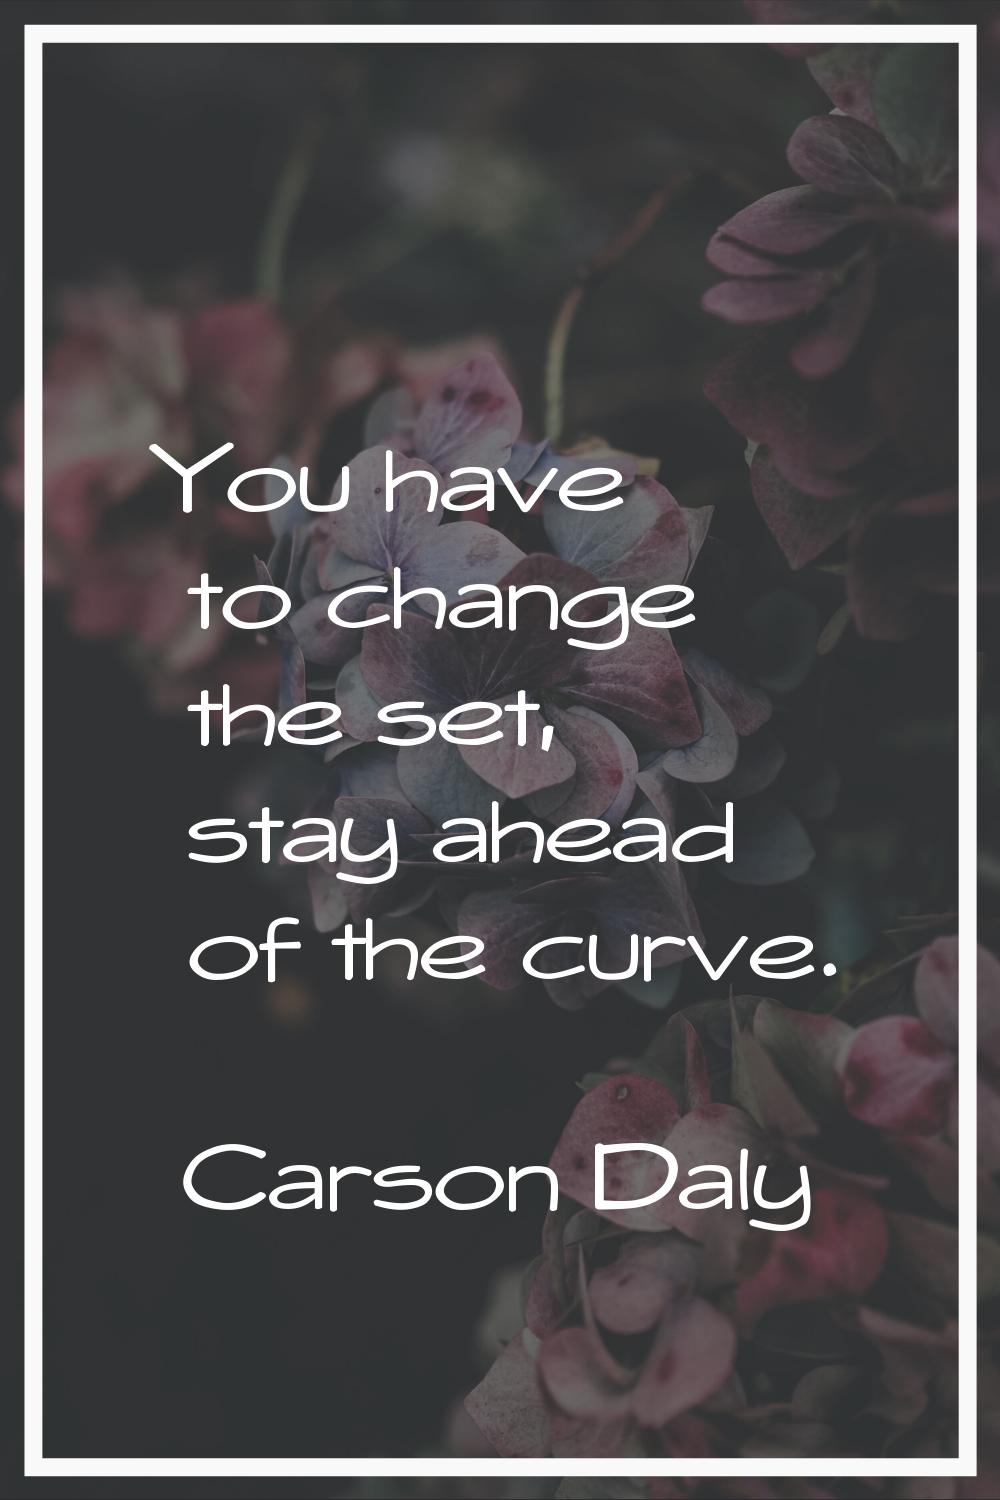 You have to change the set, stay ahead of the curve.